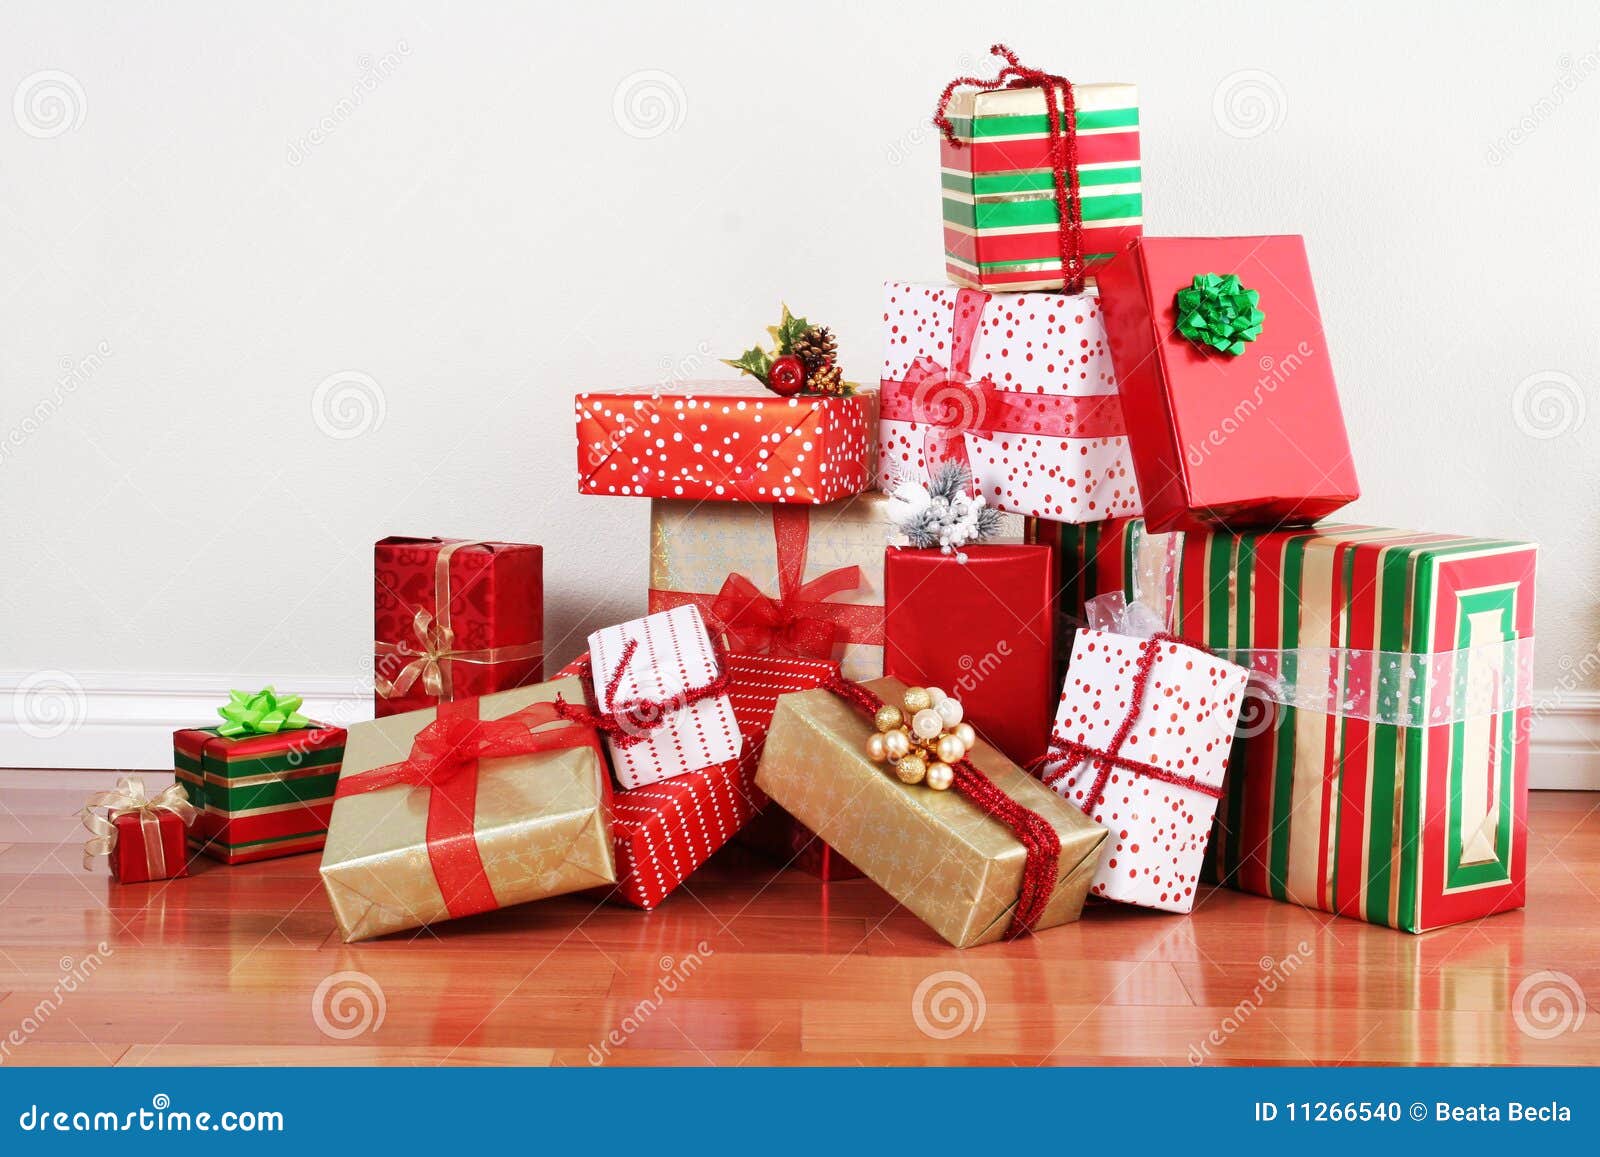 Gift Pile On A Floor Stock Photo Image 11266540